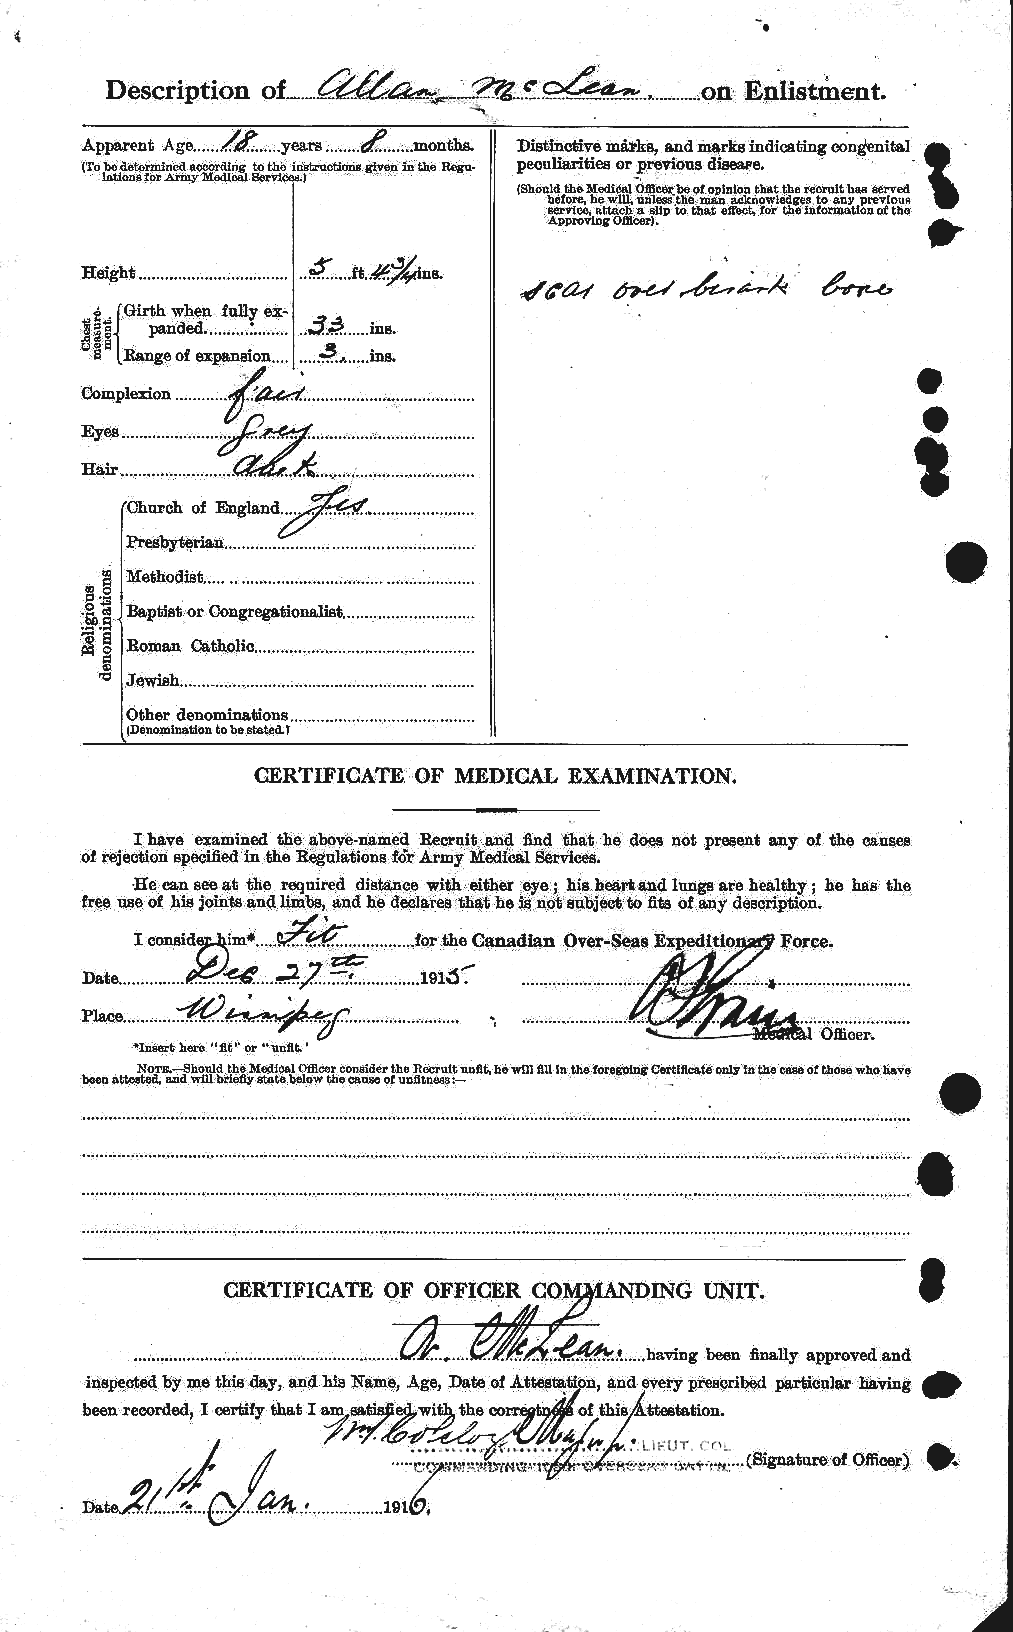 Personnel Records of the First World War - CEF 532776b